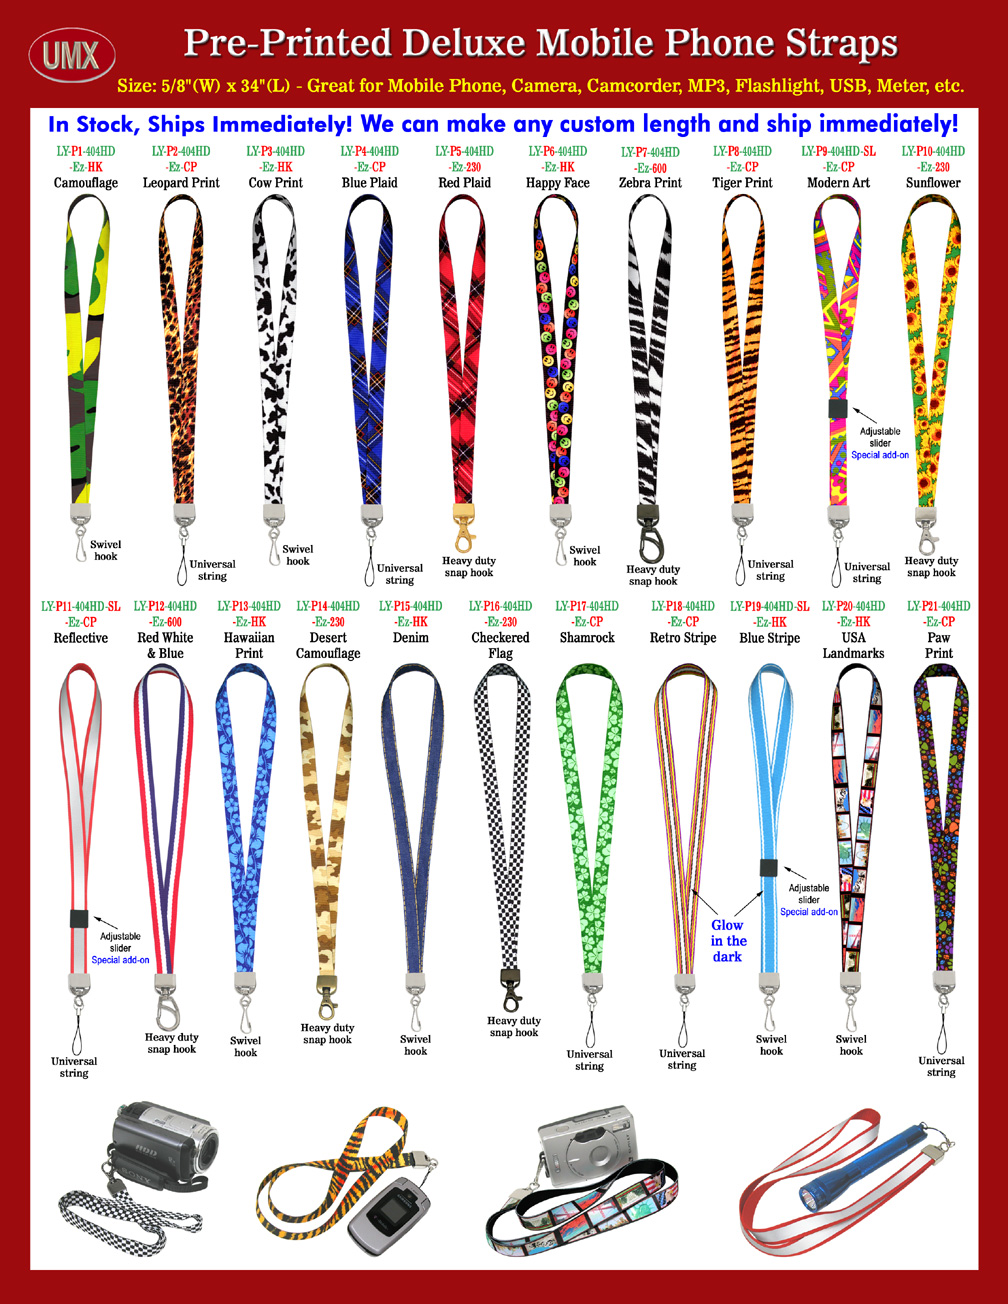 Ez-Adjustable Deluxe Mobile Phone Strap Supplies: With Pre-Printed Themes.